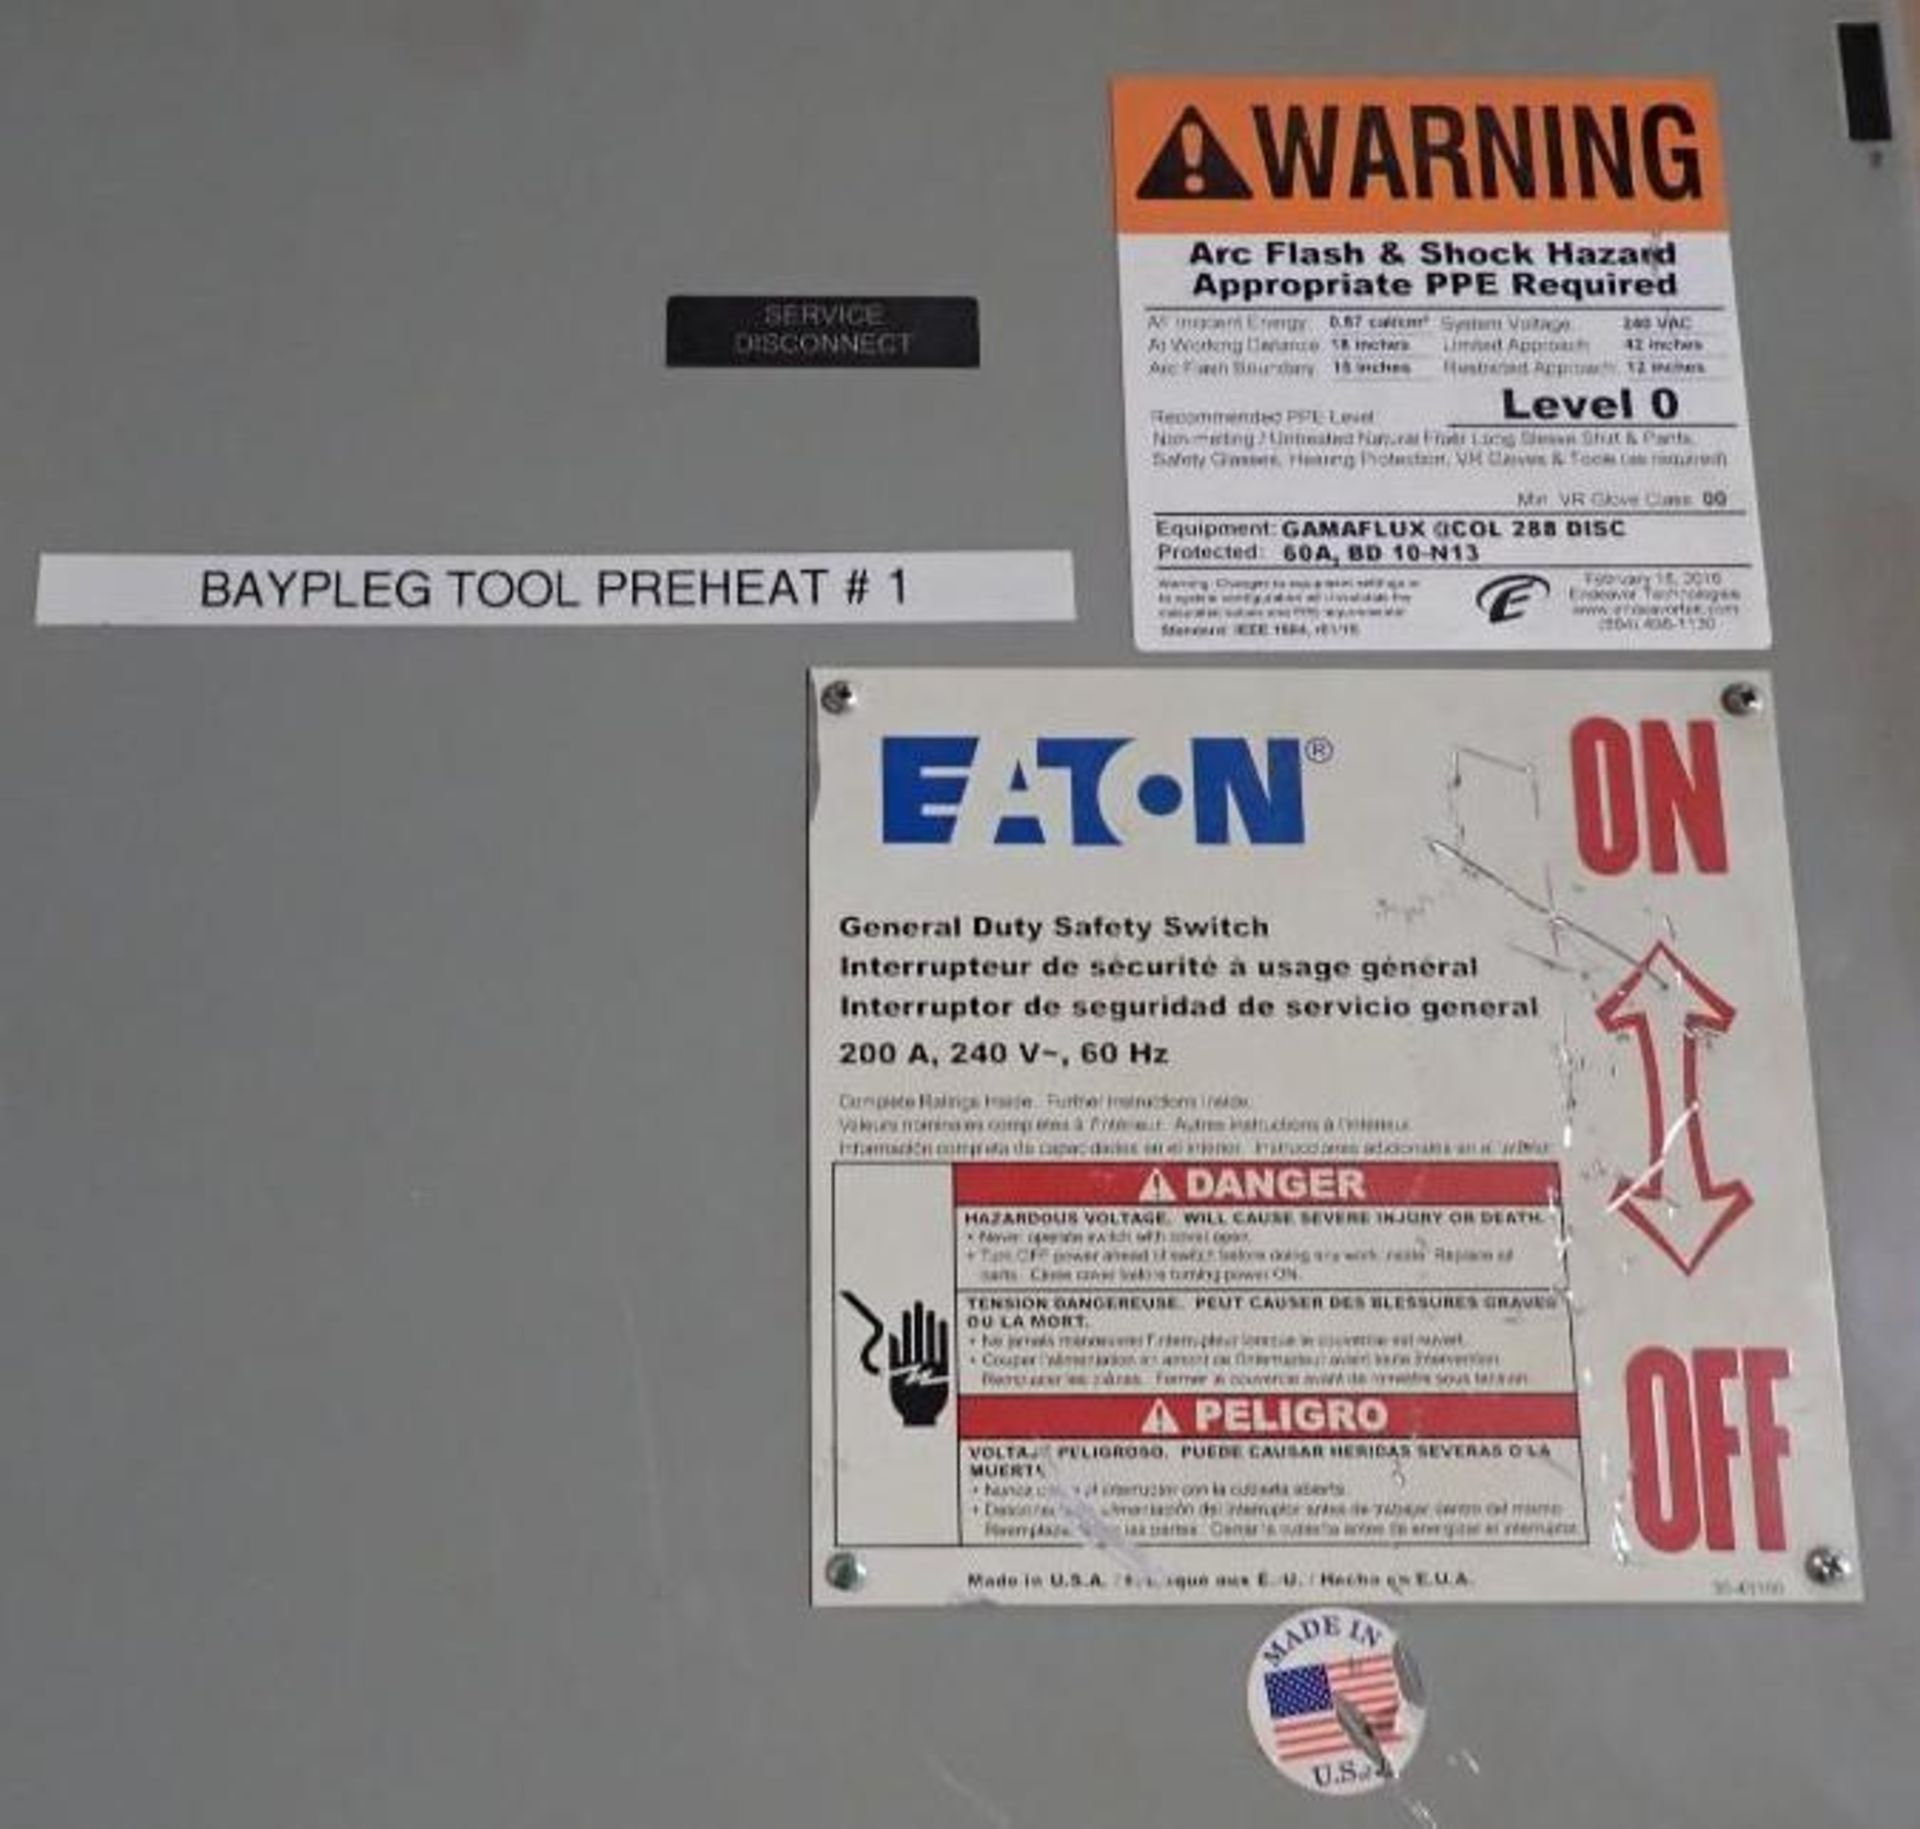 200 Amp Eaton #DG324NGK General Duty Safety Switch - Image 3 of 6